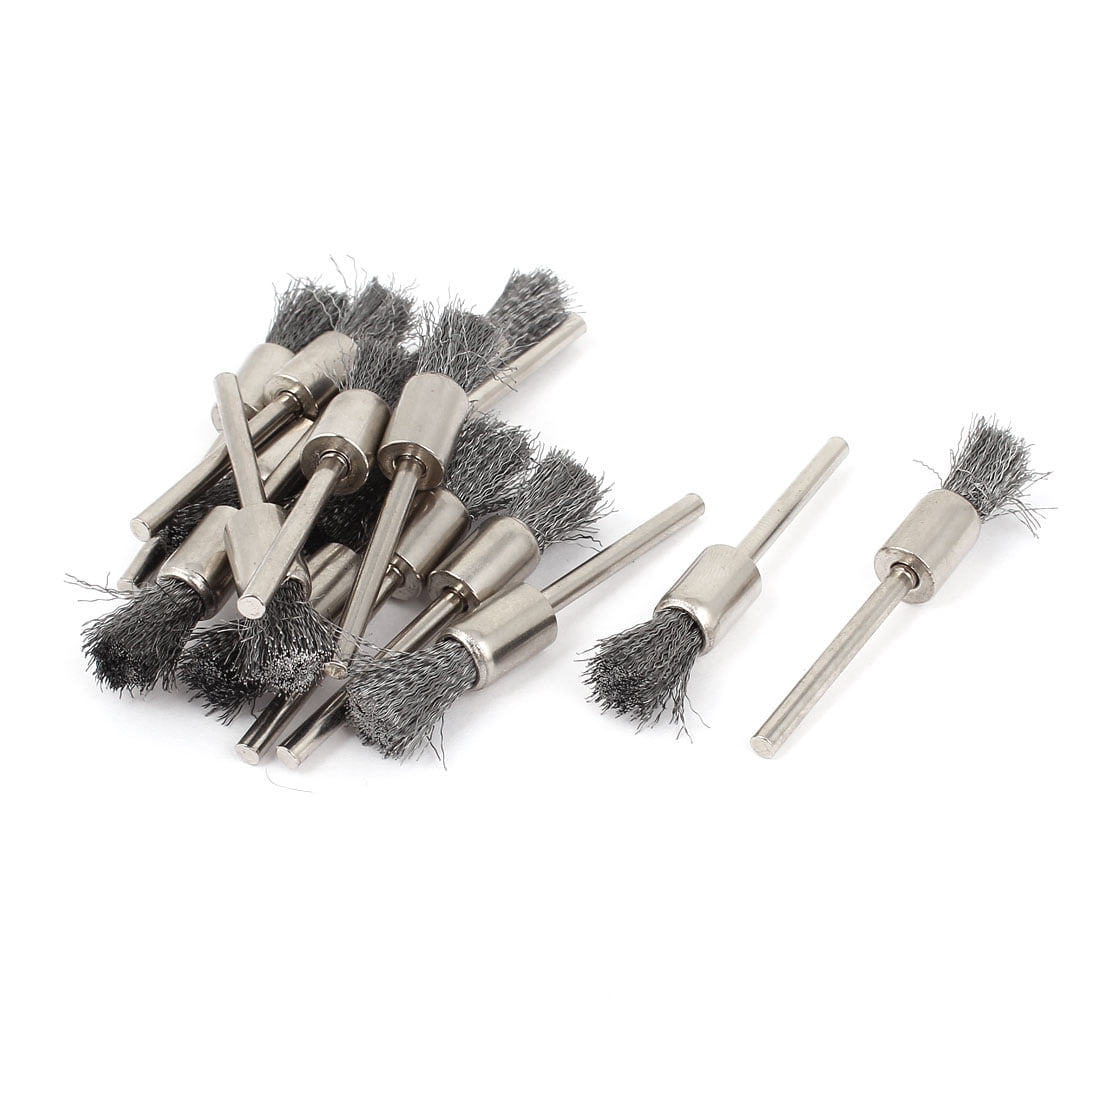 Details about   15pcs 5mm stainless Steel Pencil Wire Wheel Cup Brushes polishing Rotary Tool 